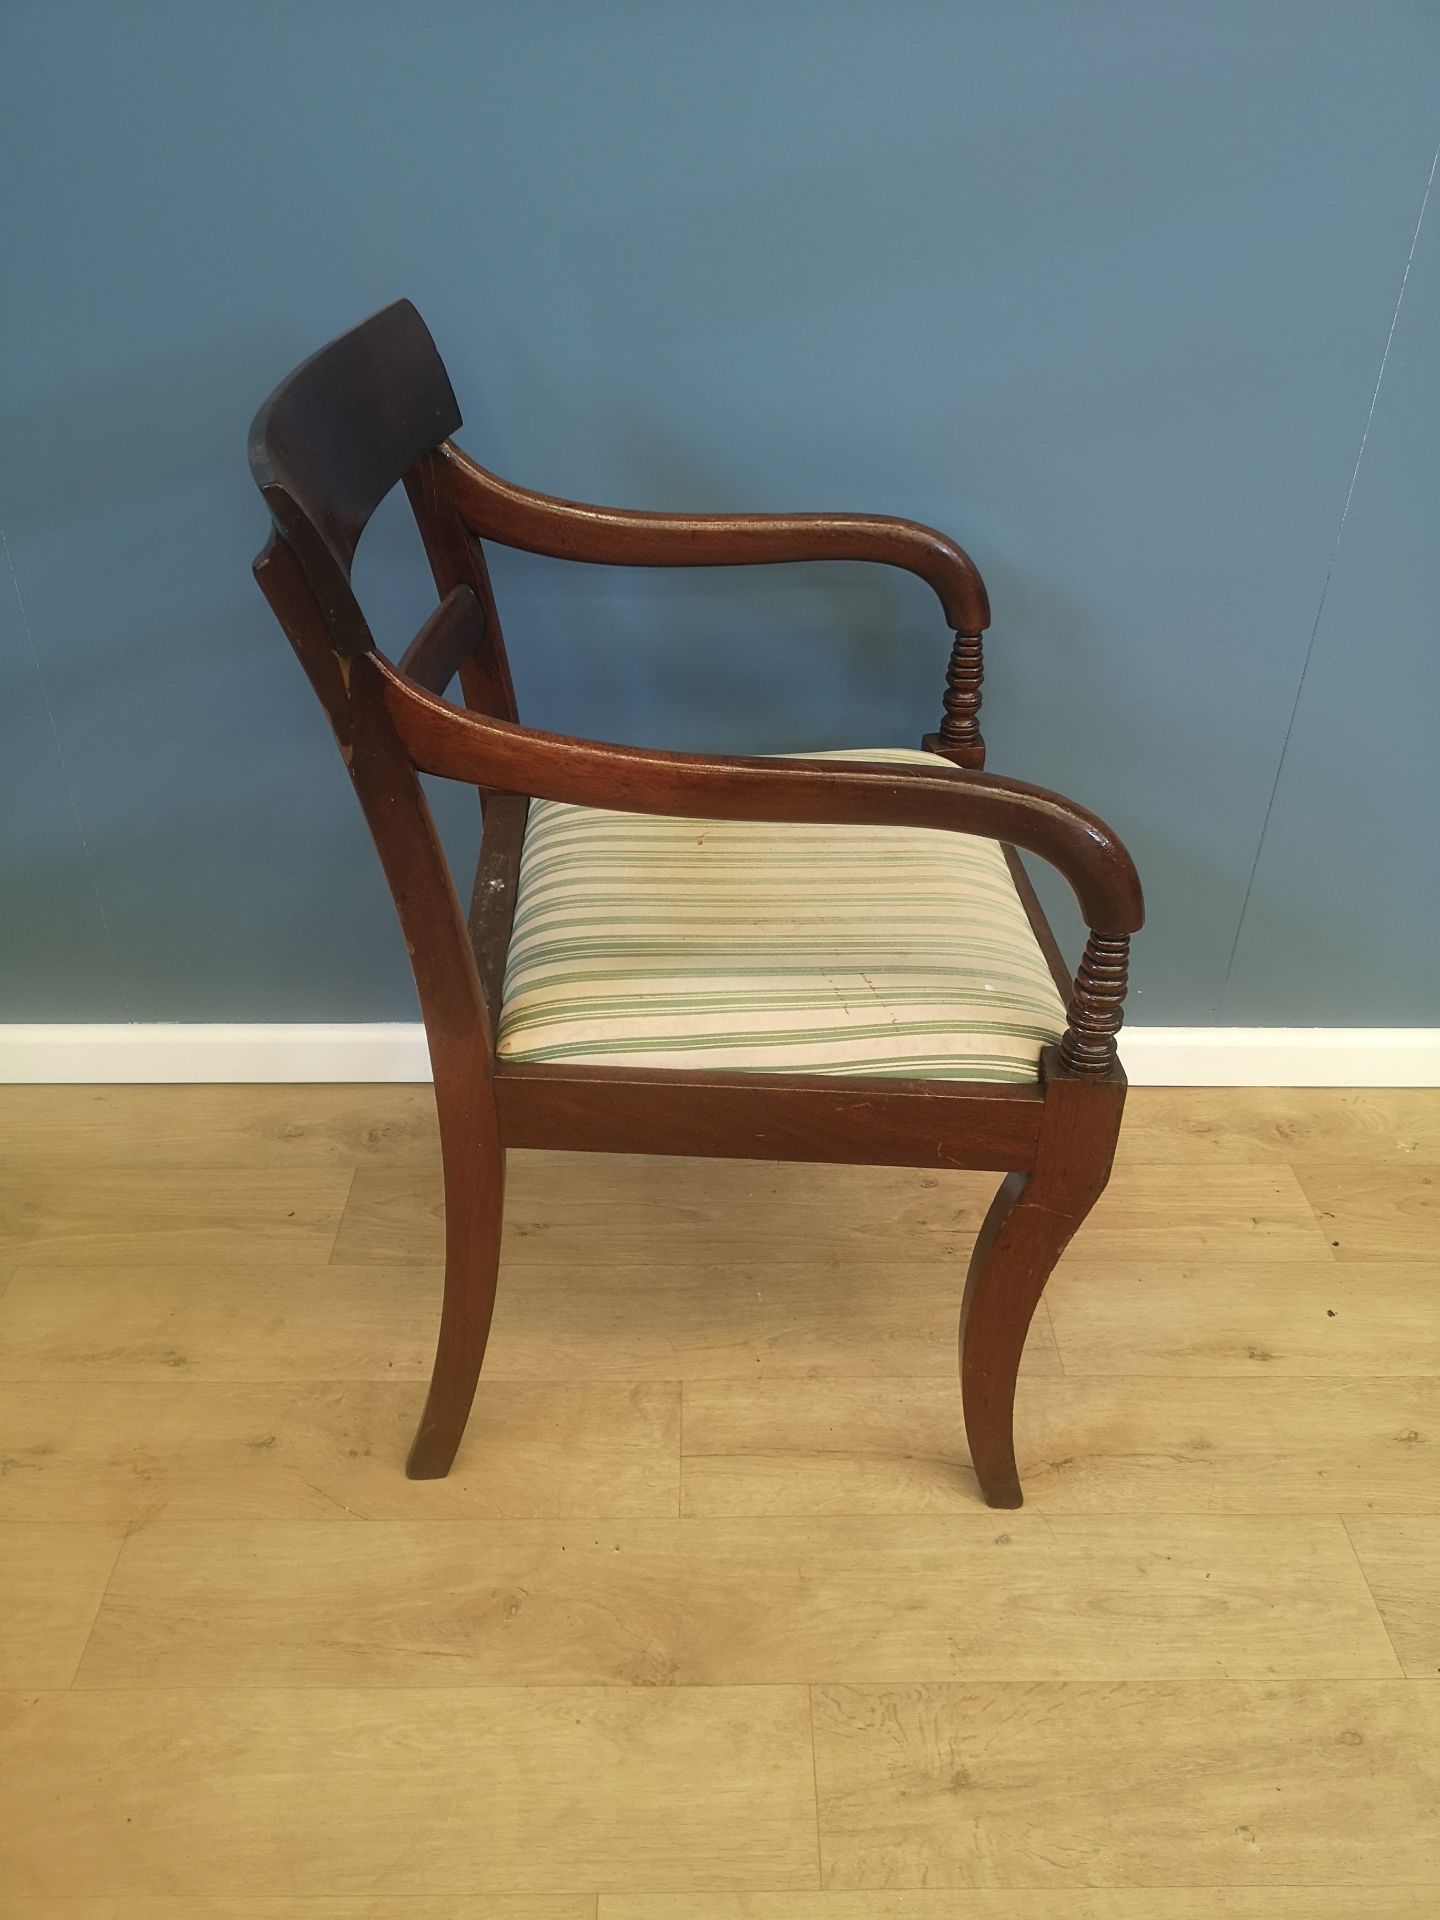 Two mahogany open arm chairs - Image 5 of 5